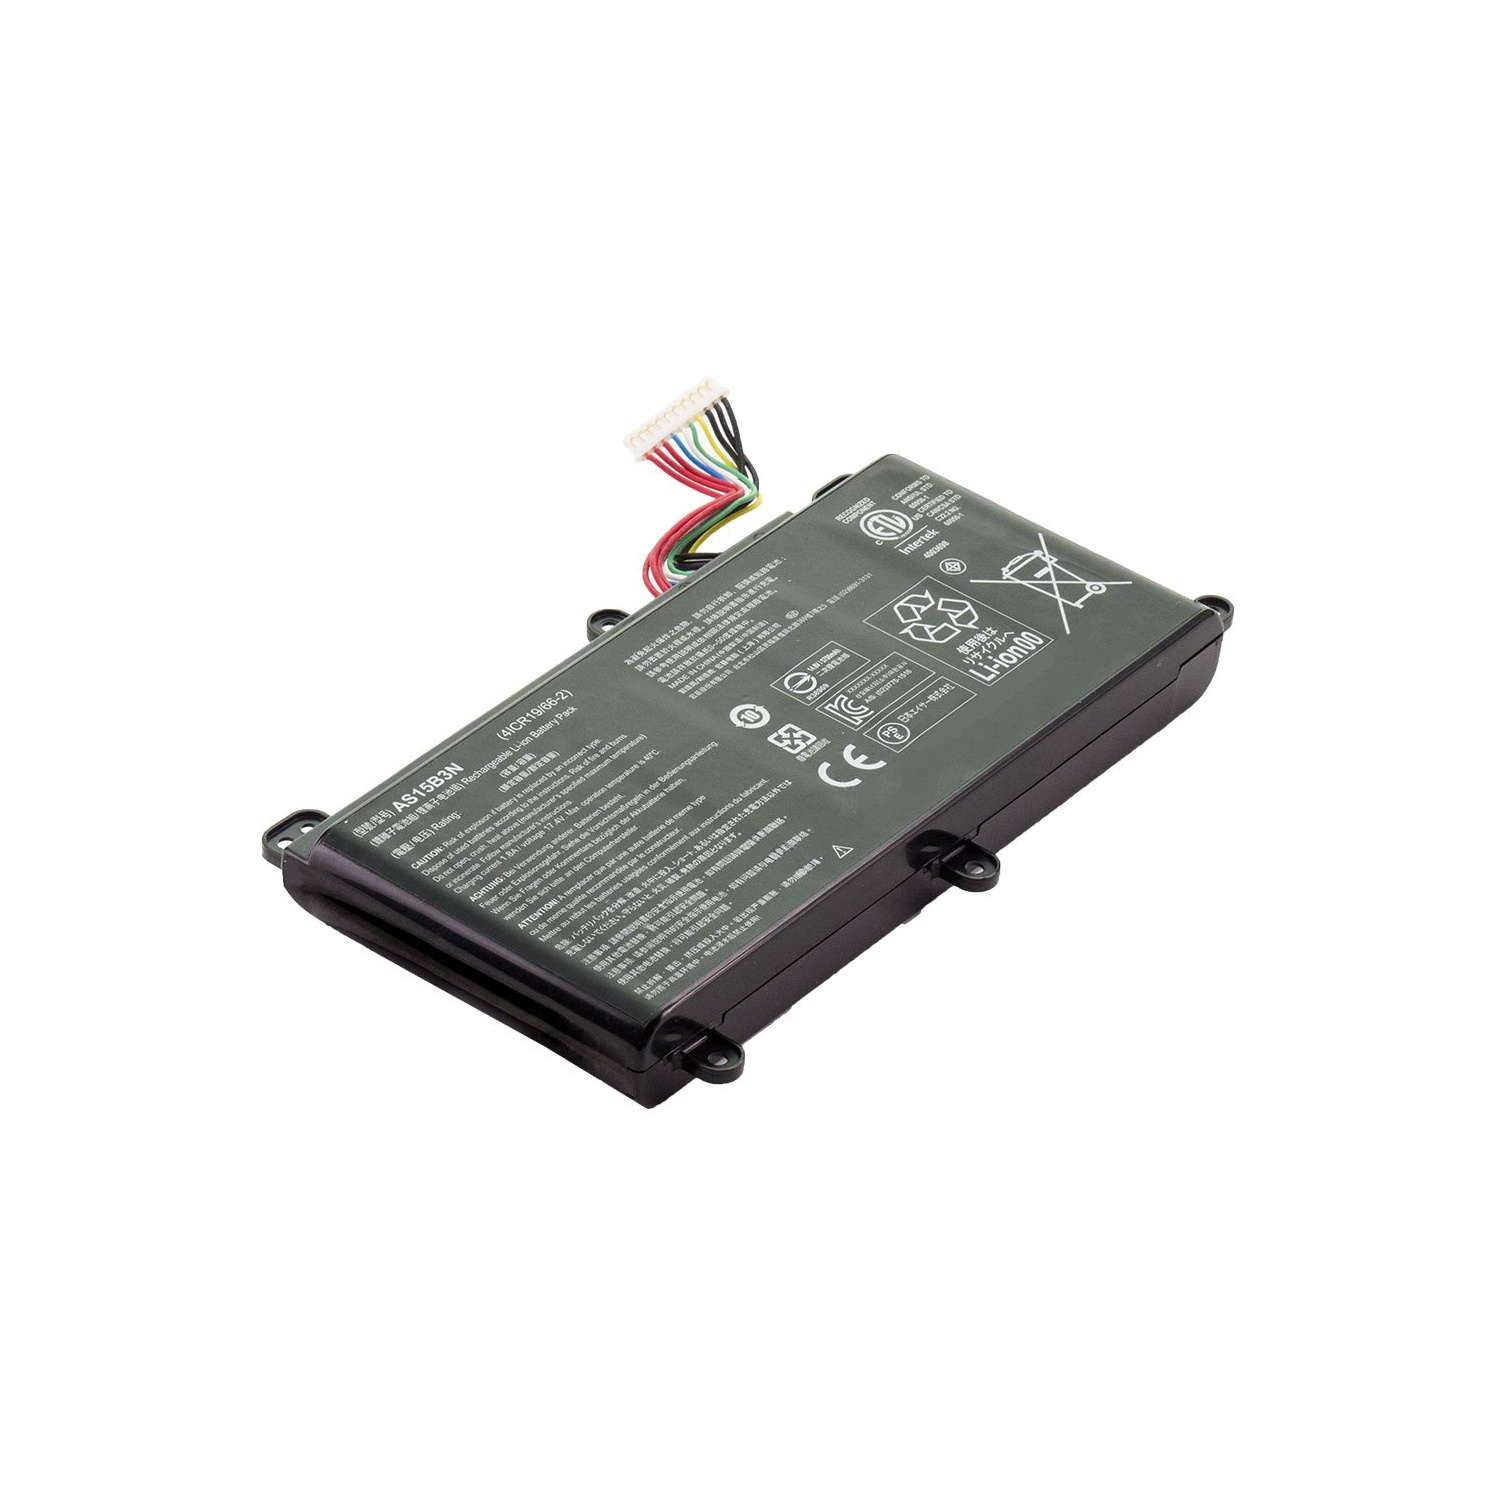 Laptop Battery Replacement for Acer Predator 17 G9-791-79XV, AS15B3N, KT.00803.004, KT.00803.005